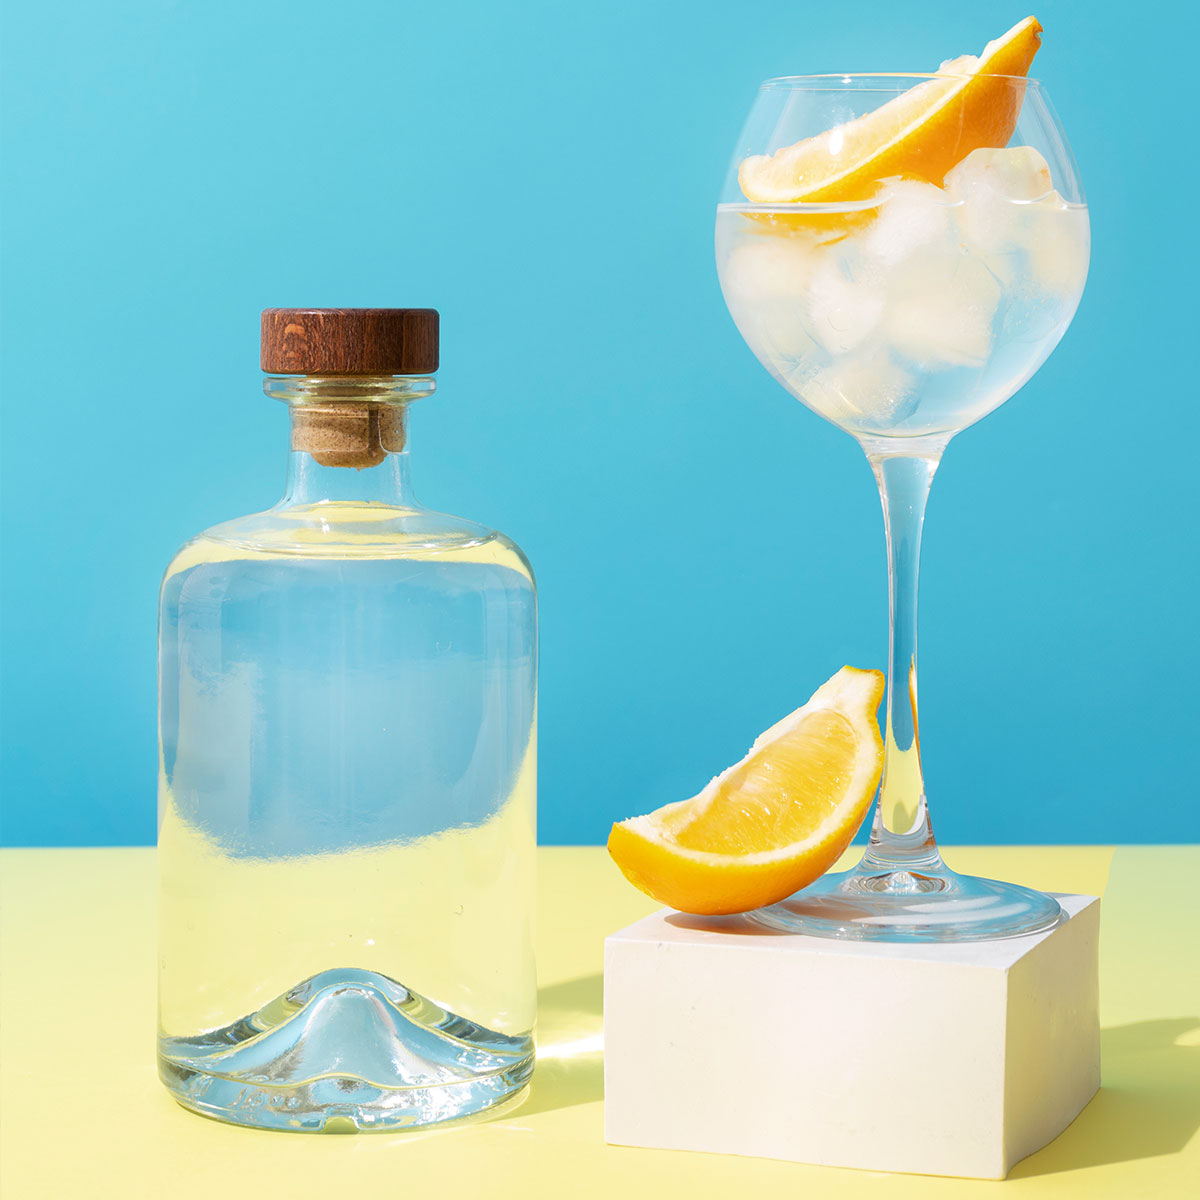 What Is The Best Glass To Drink Gin Out Of?